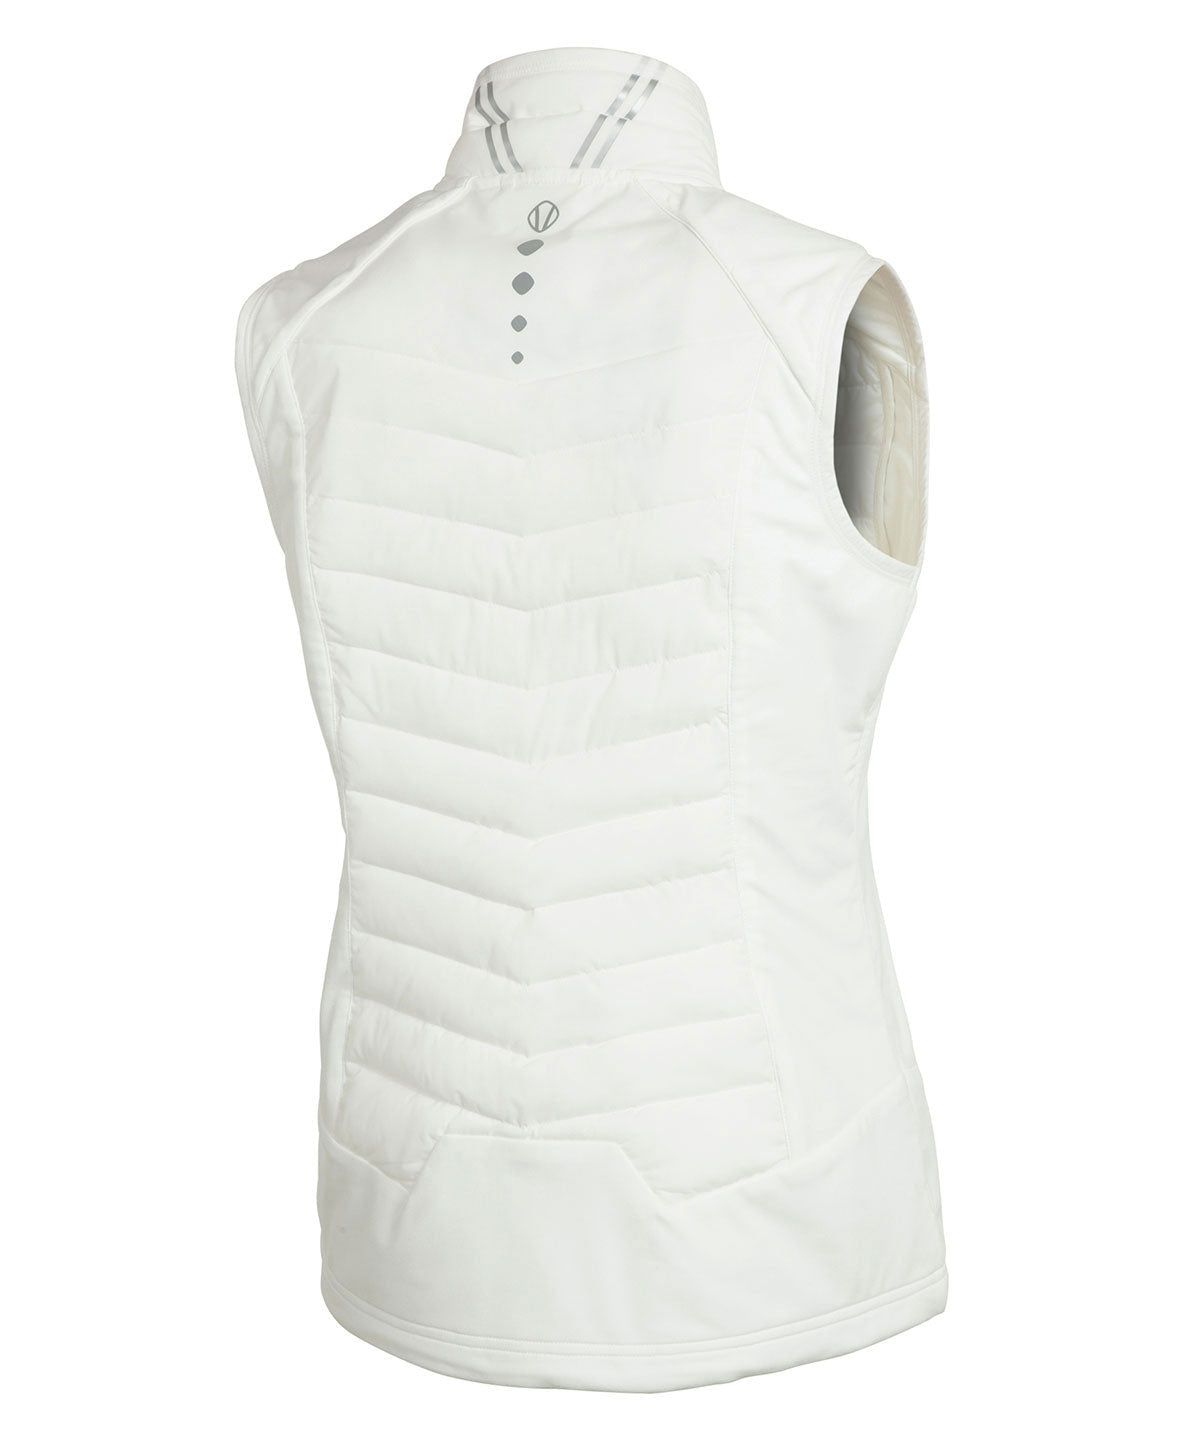 123rd U.S. Amateur Sunice Women's Lizzie Quilted Thermal Vest